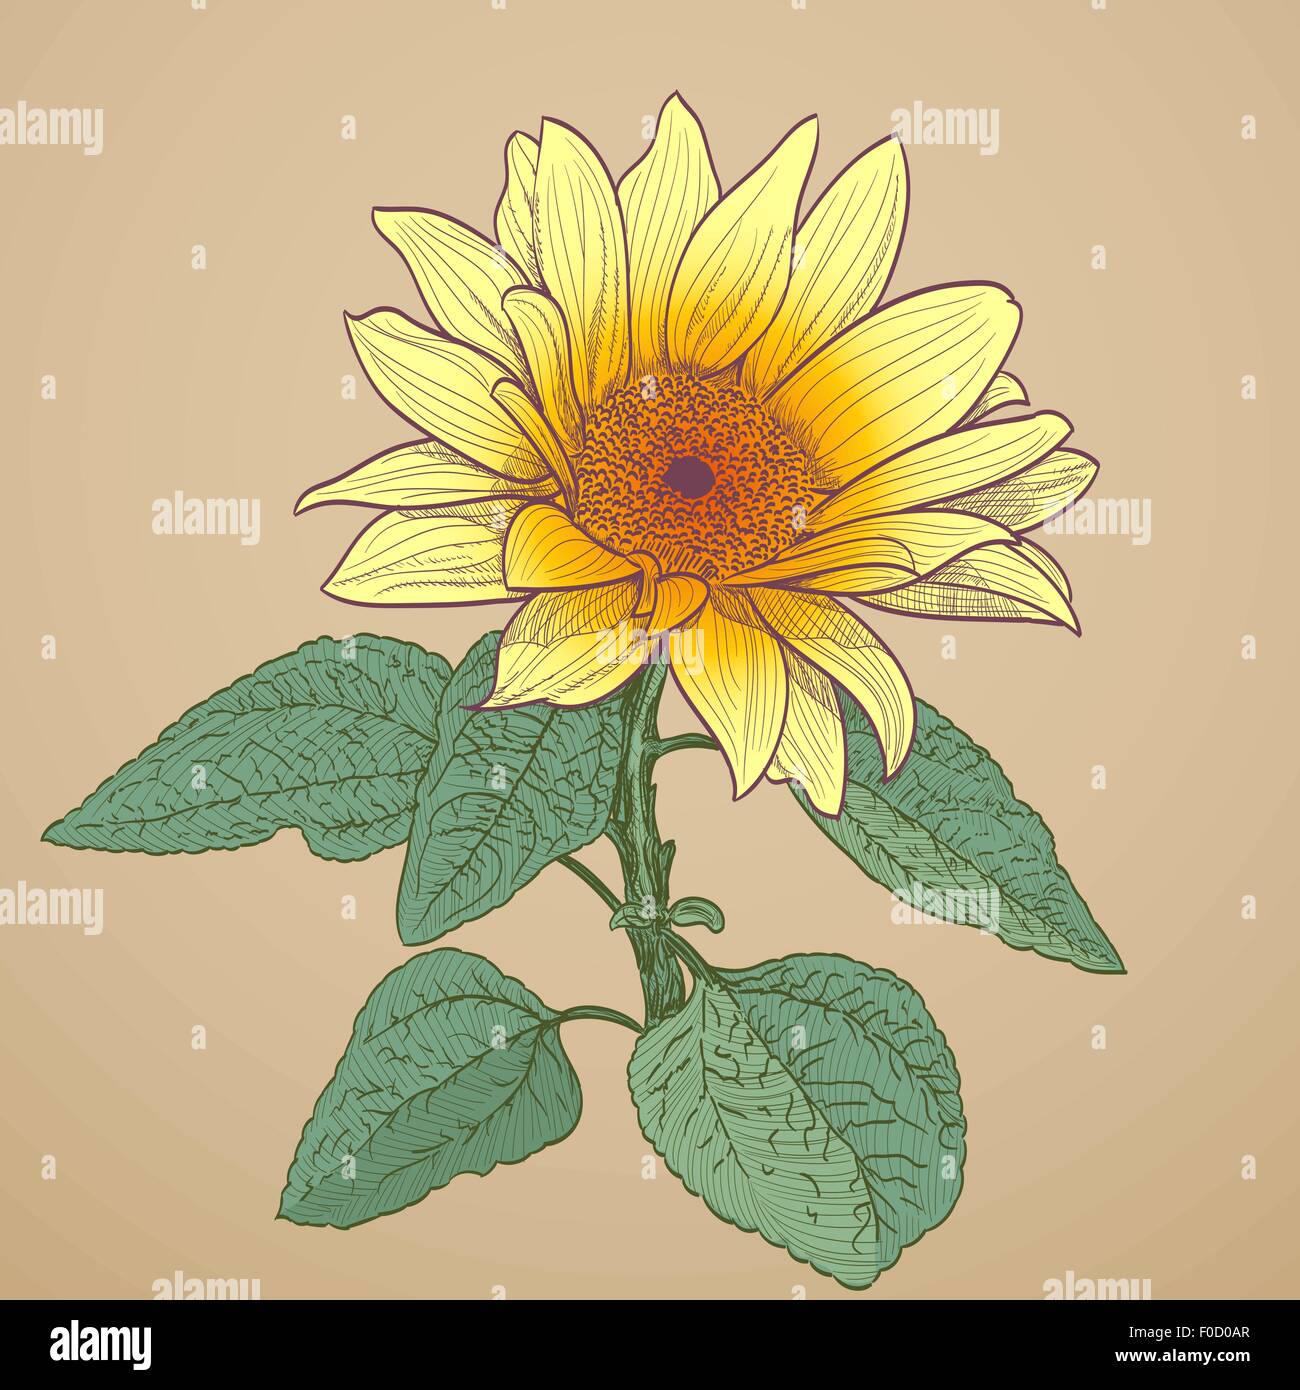 How to draw a realistic sunflower  Step by step tutorial  tips